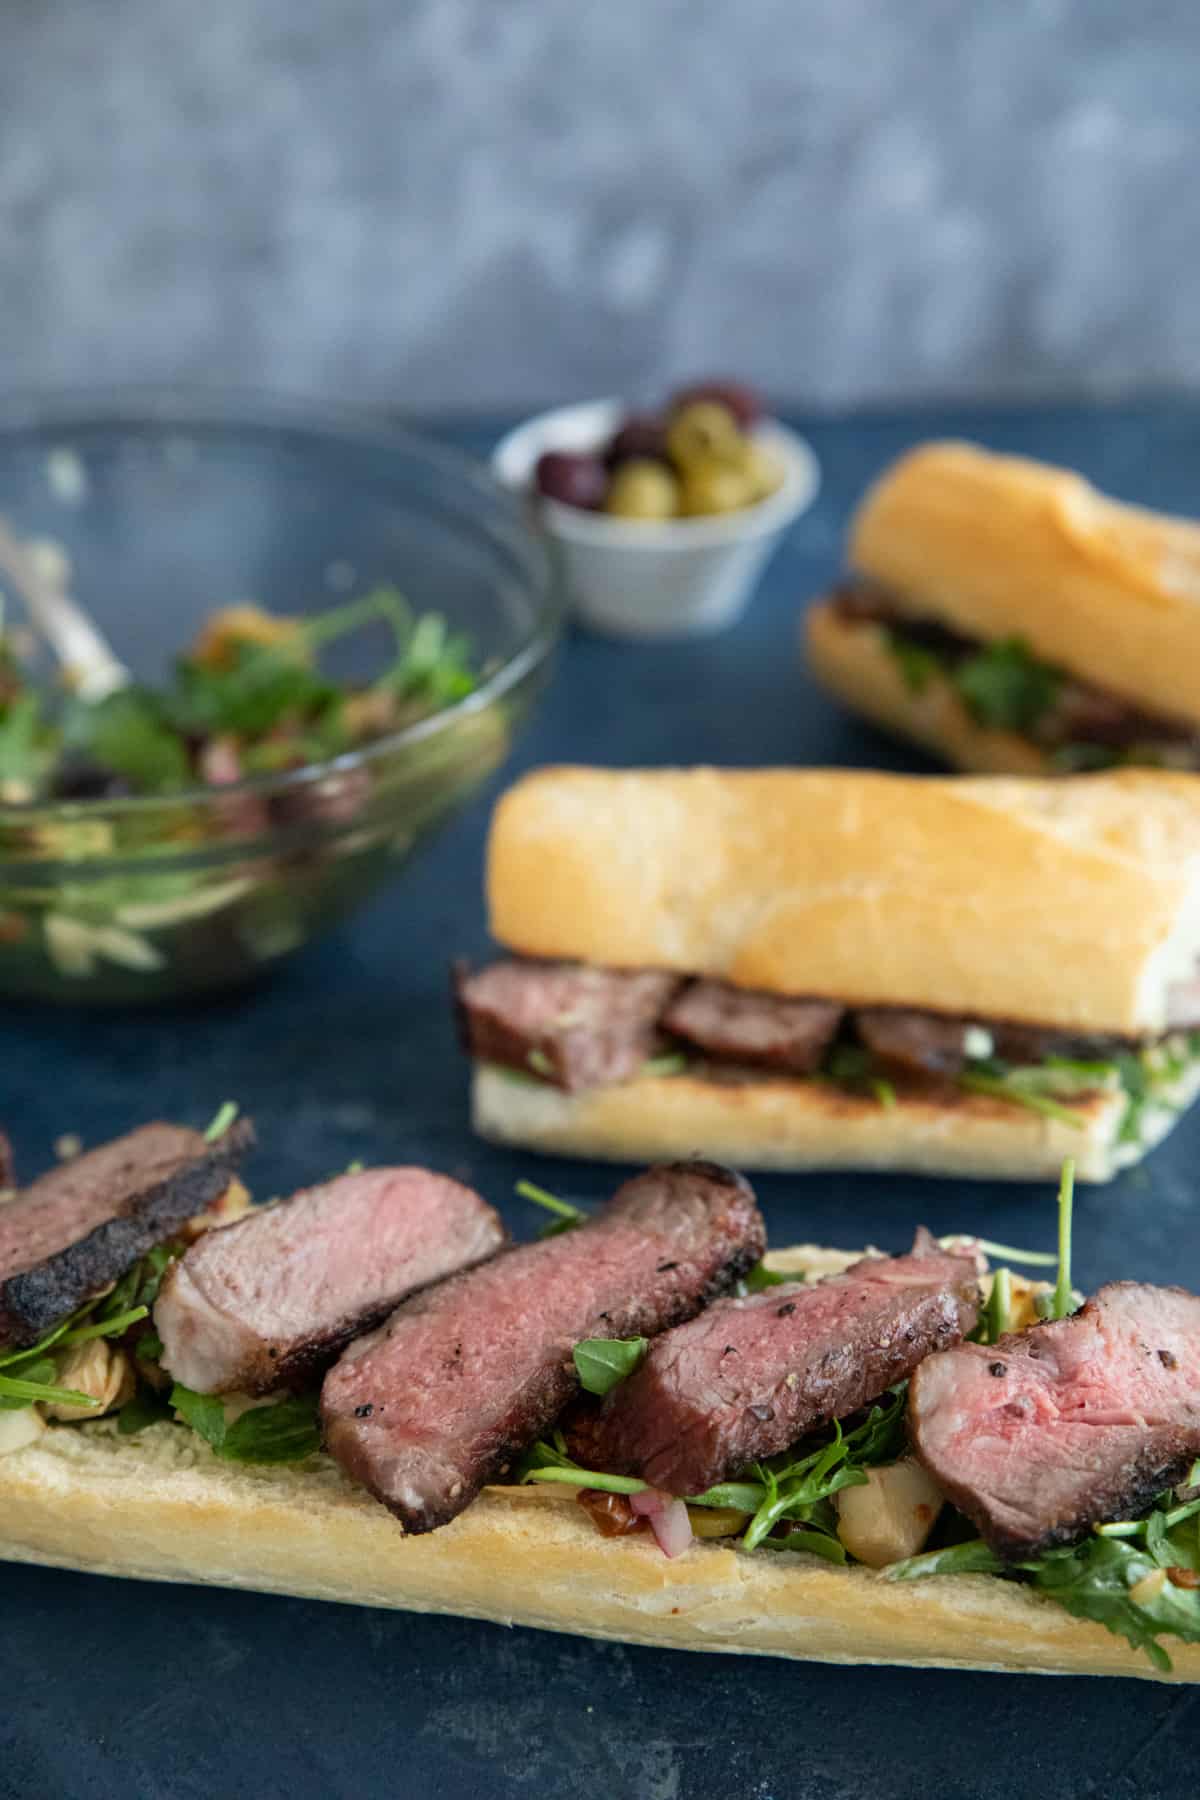 This steak sandwich is juicy, tasty and ready in 30 minutes. Served with a tasty arugula salad and a pesto sauce, every bite of this sandwich is delicious!
